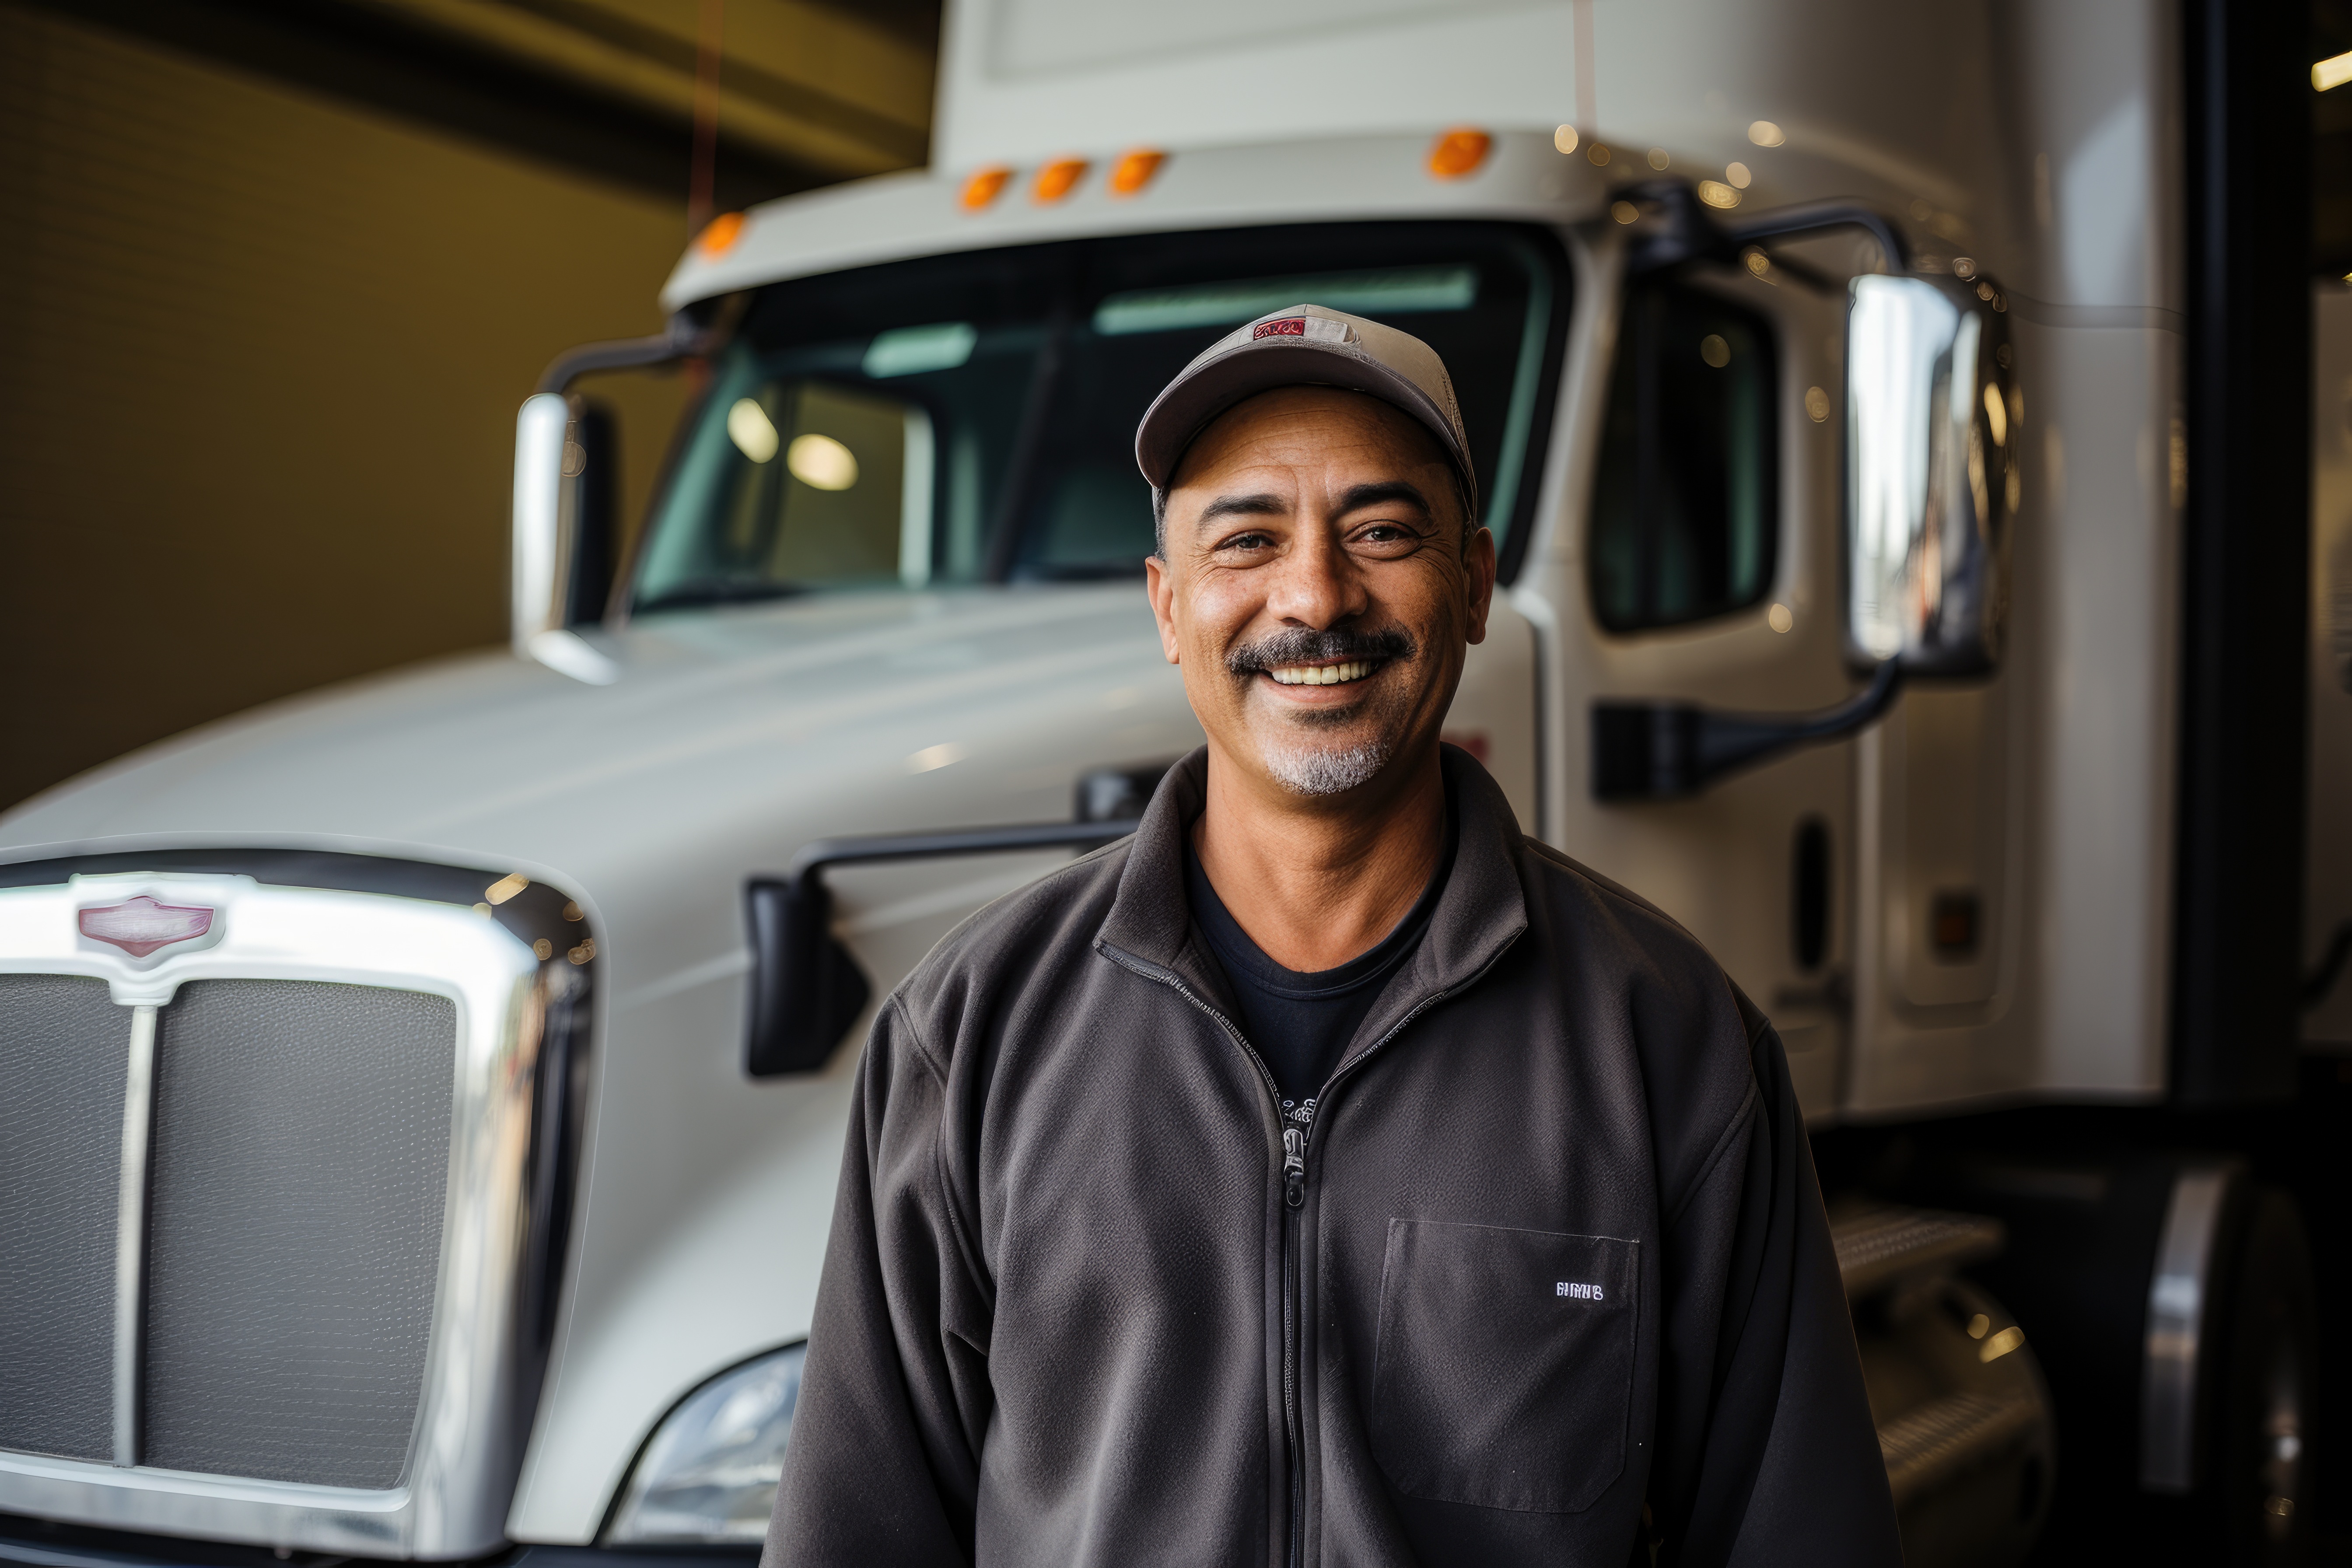 Man standing in front of white semi-truck smiling